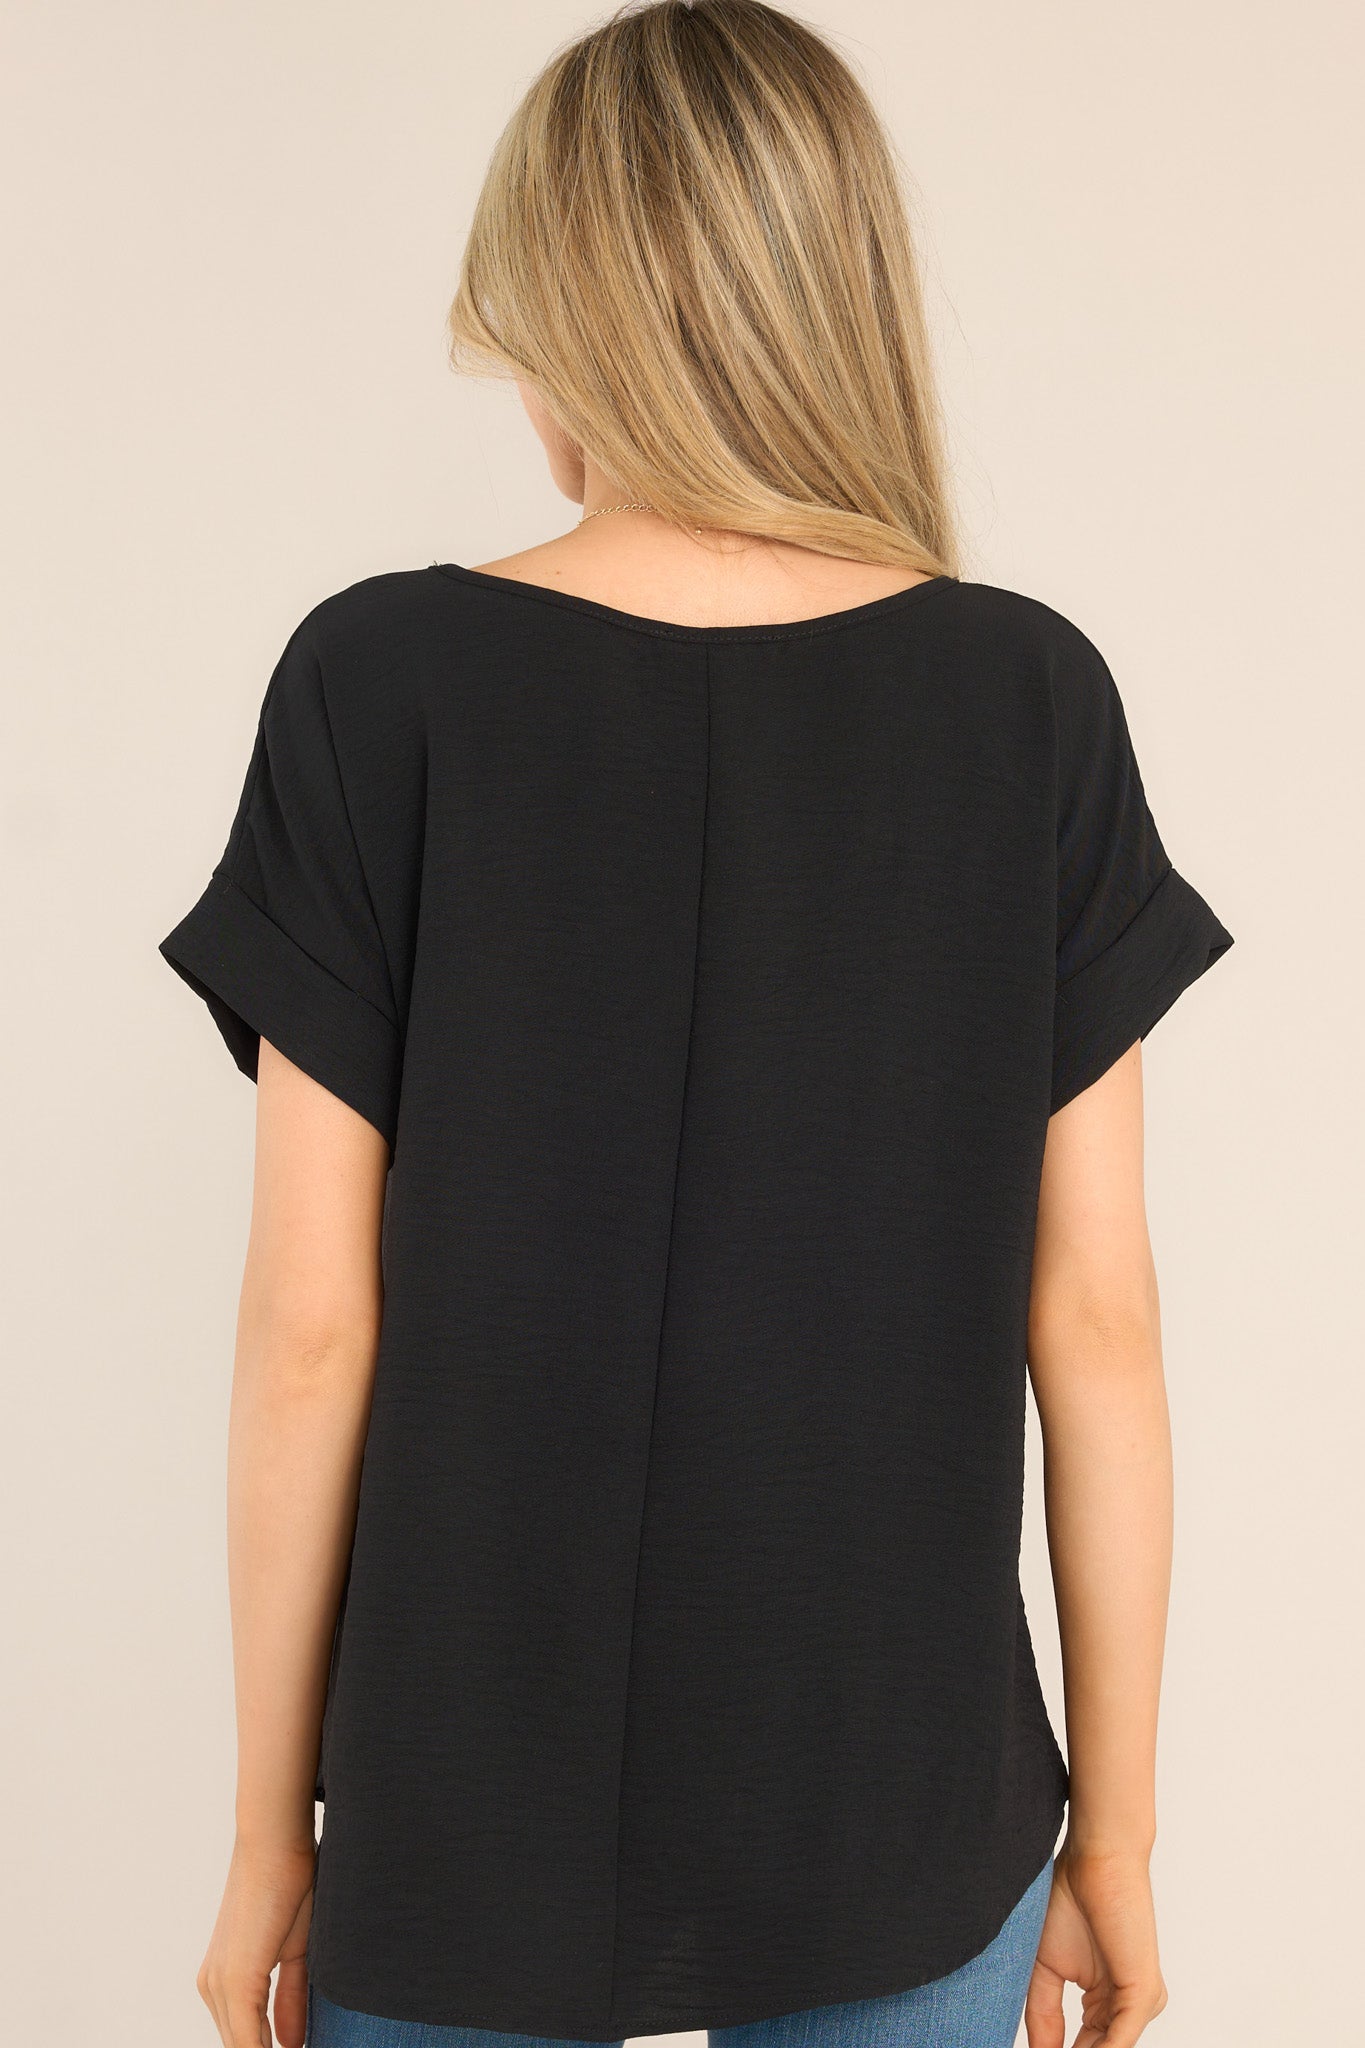 Back view of this top that features a wide crew neckline, rolled & pinned short sleeves, and a relaxed fit.